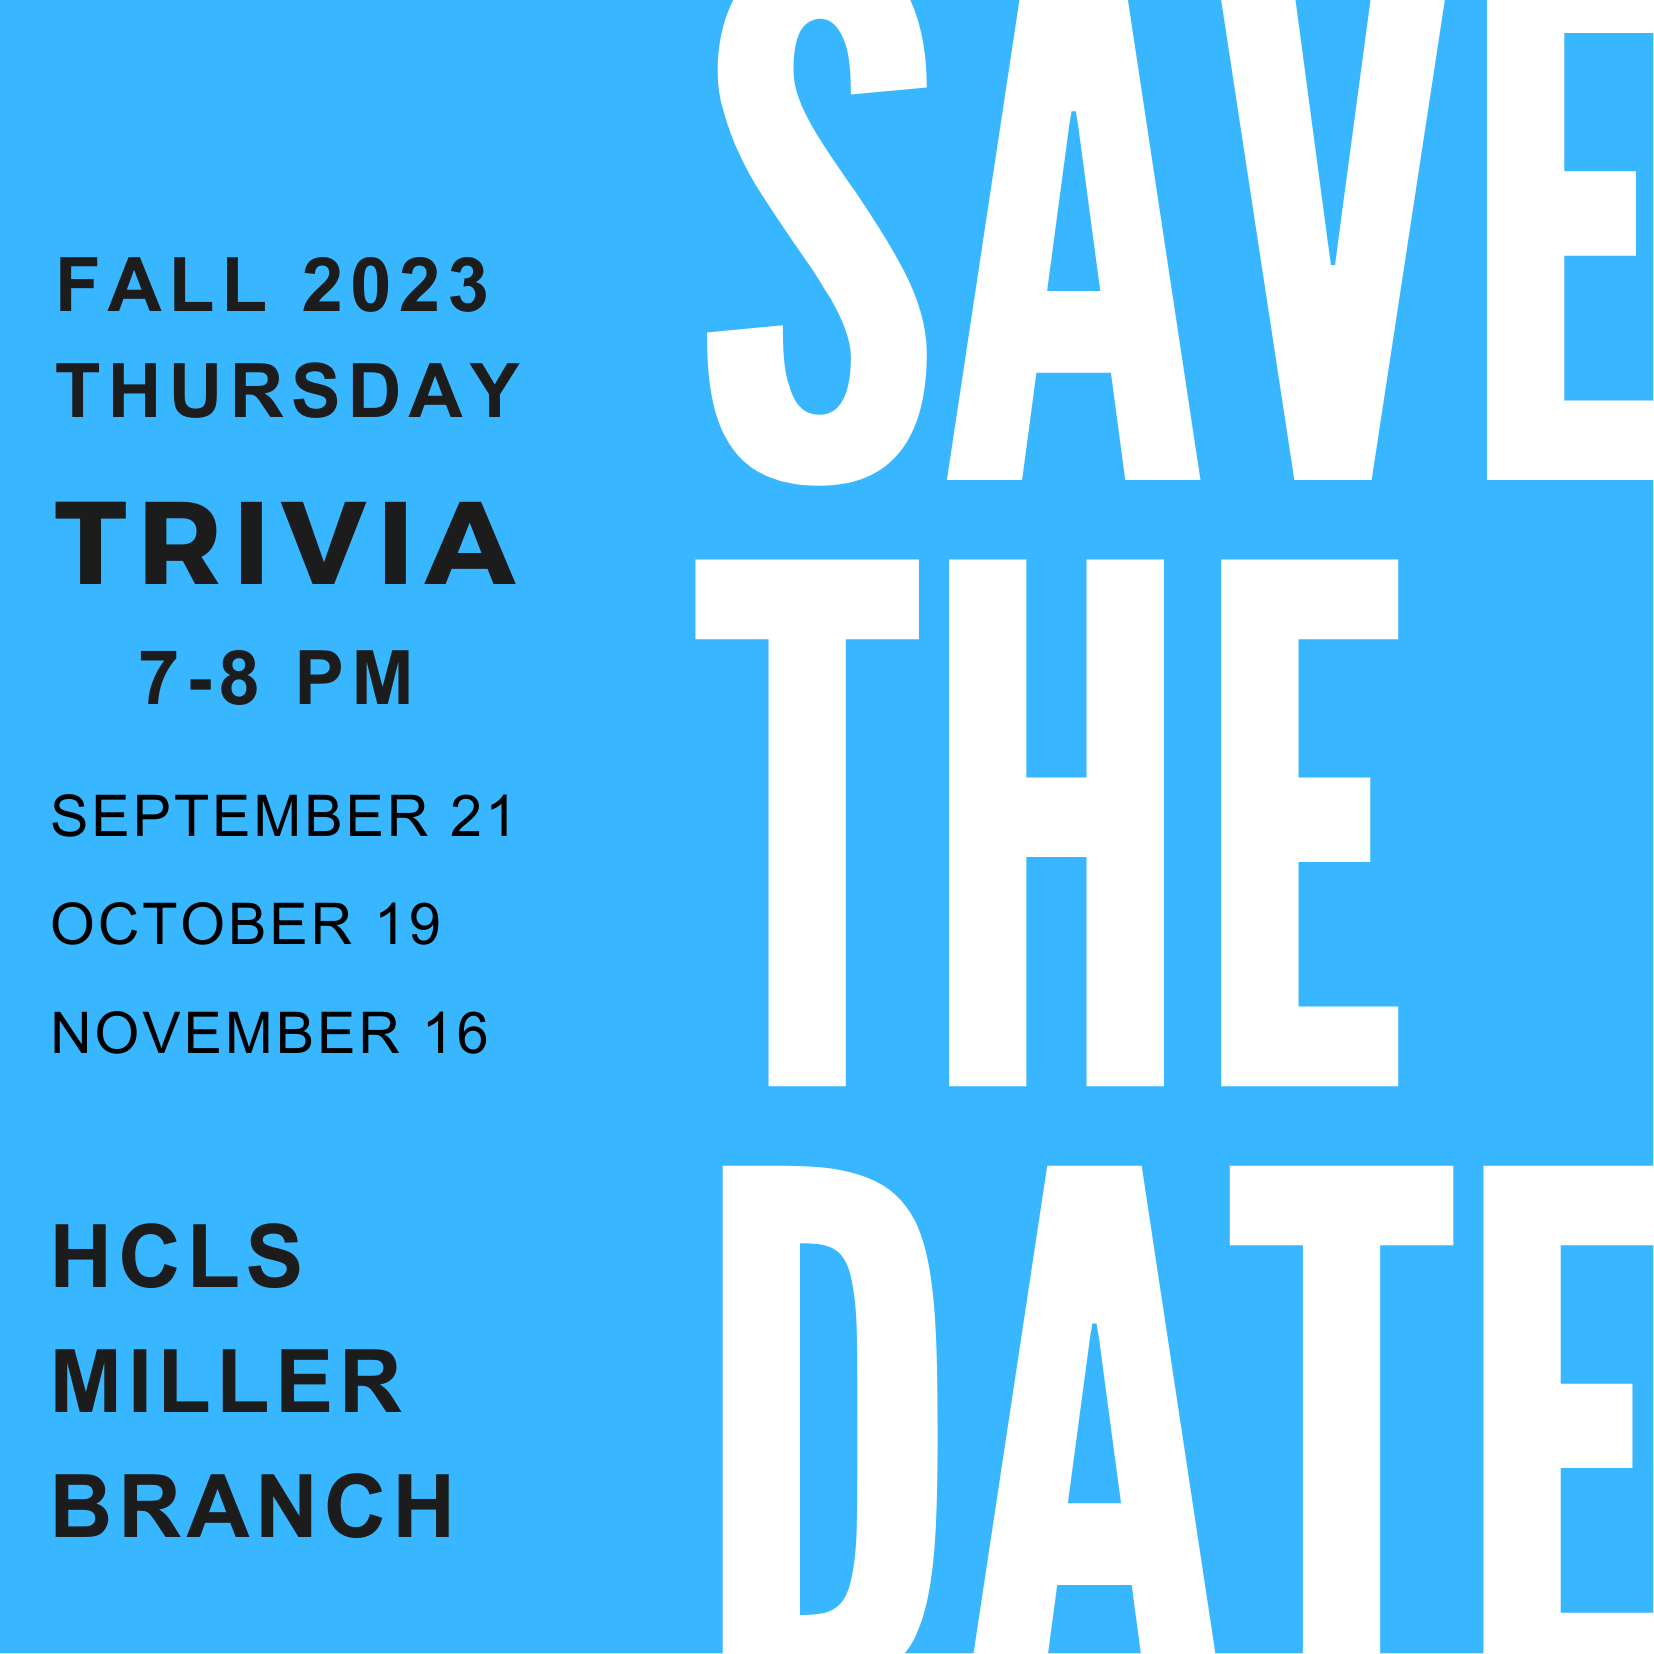 Save the date withe the Trivia fall dates listed Sept 21, Oct 19, Nov 16